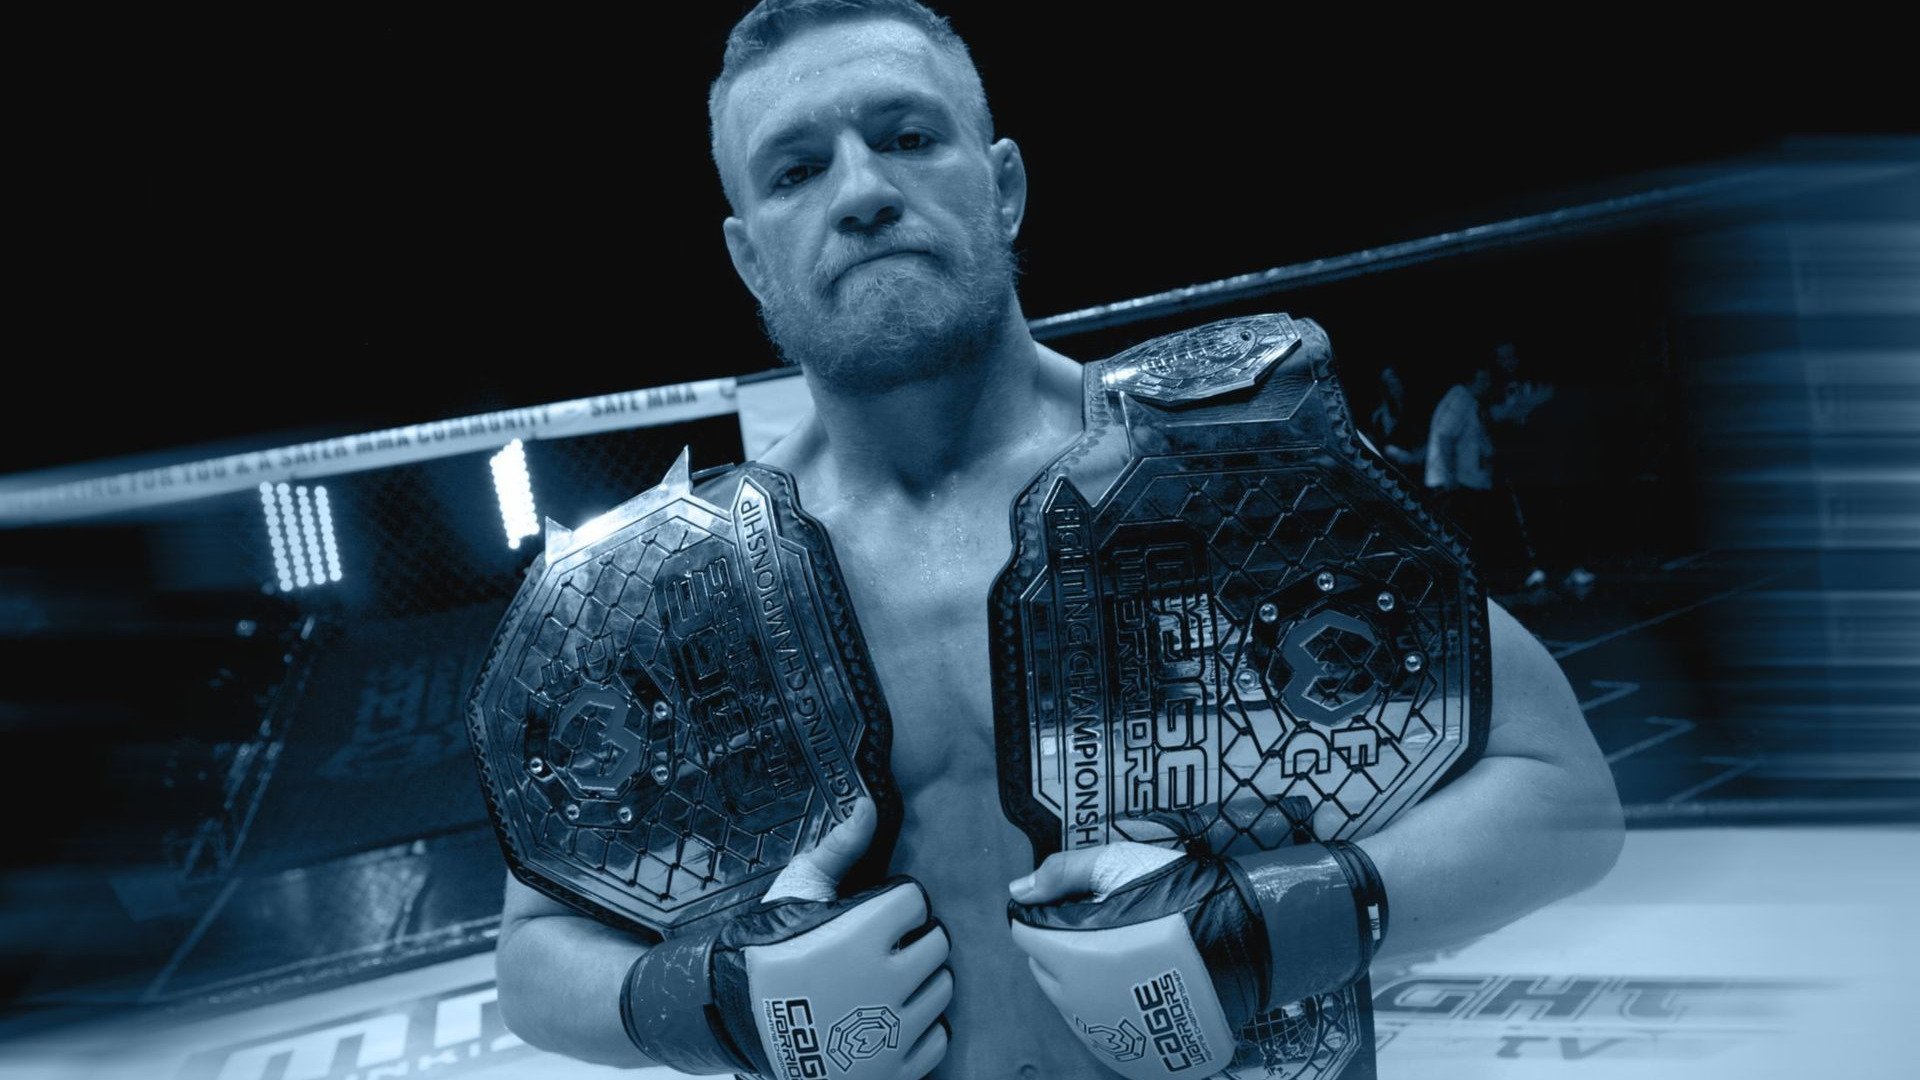 1920x1080 Download wallpaper fighter, fighter, mma, ufc, mixed martial arts, championship belt, conor mcgregor, Conor McGregor, section sports in resoluti